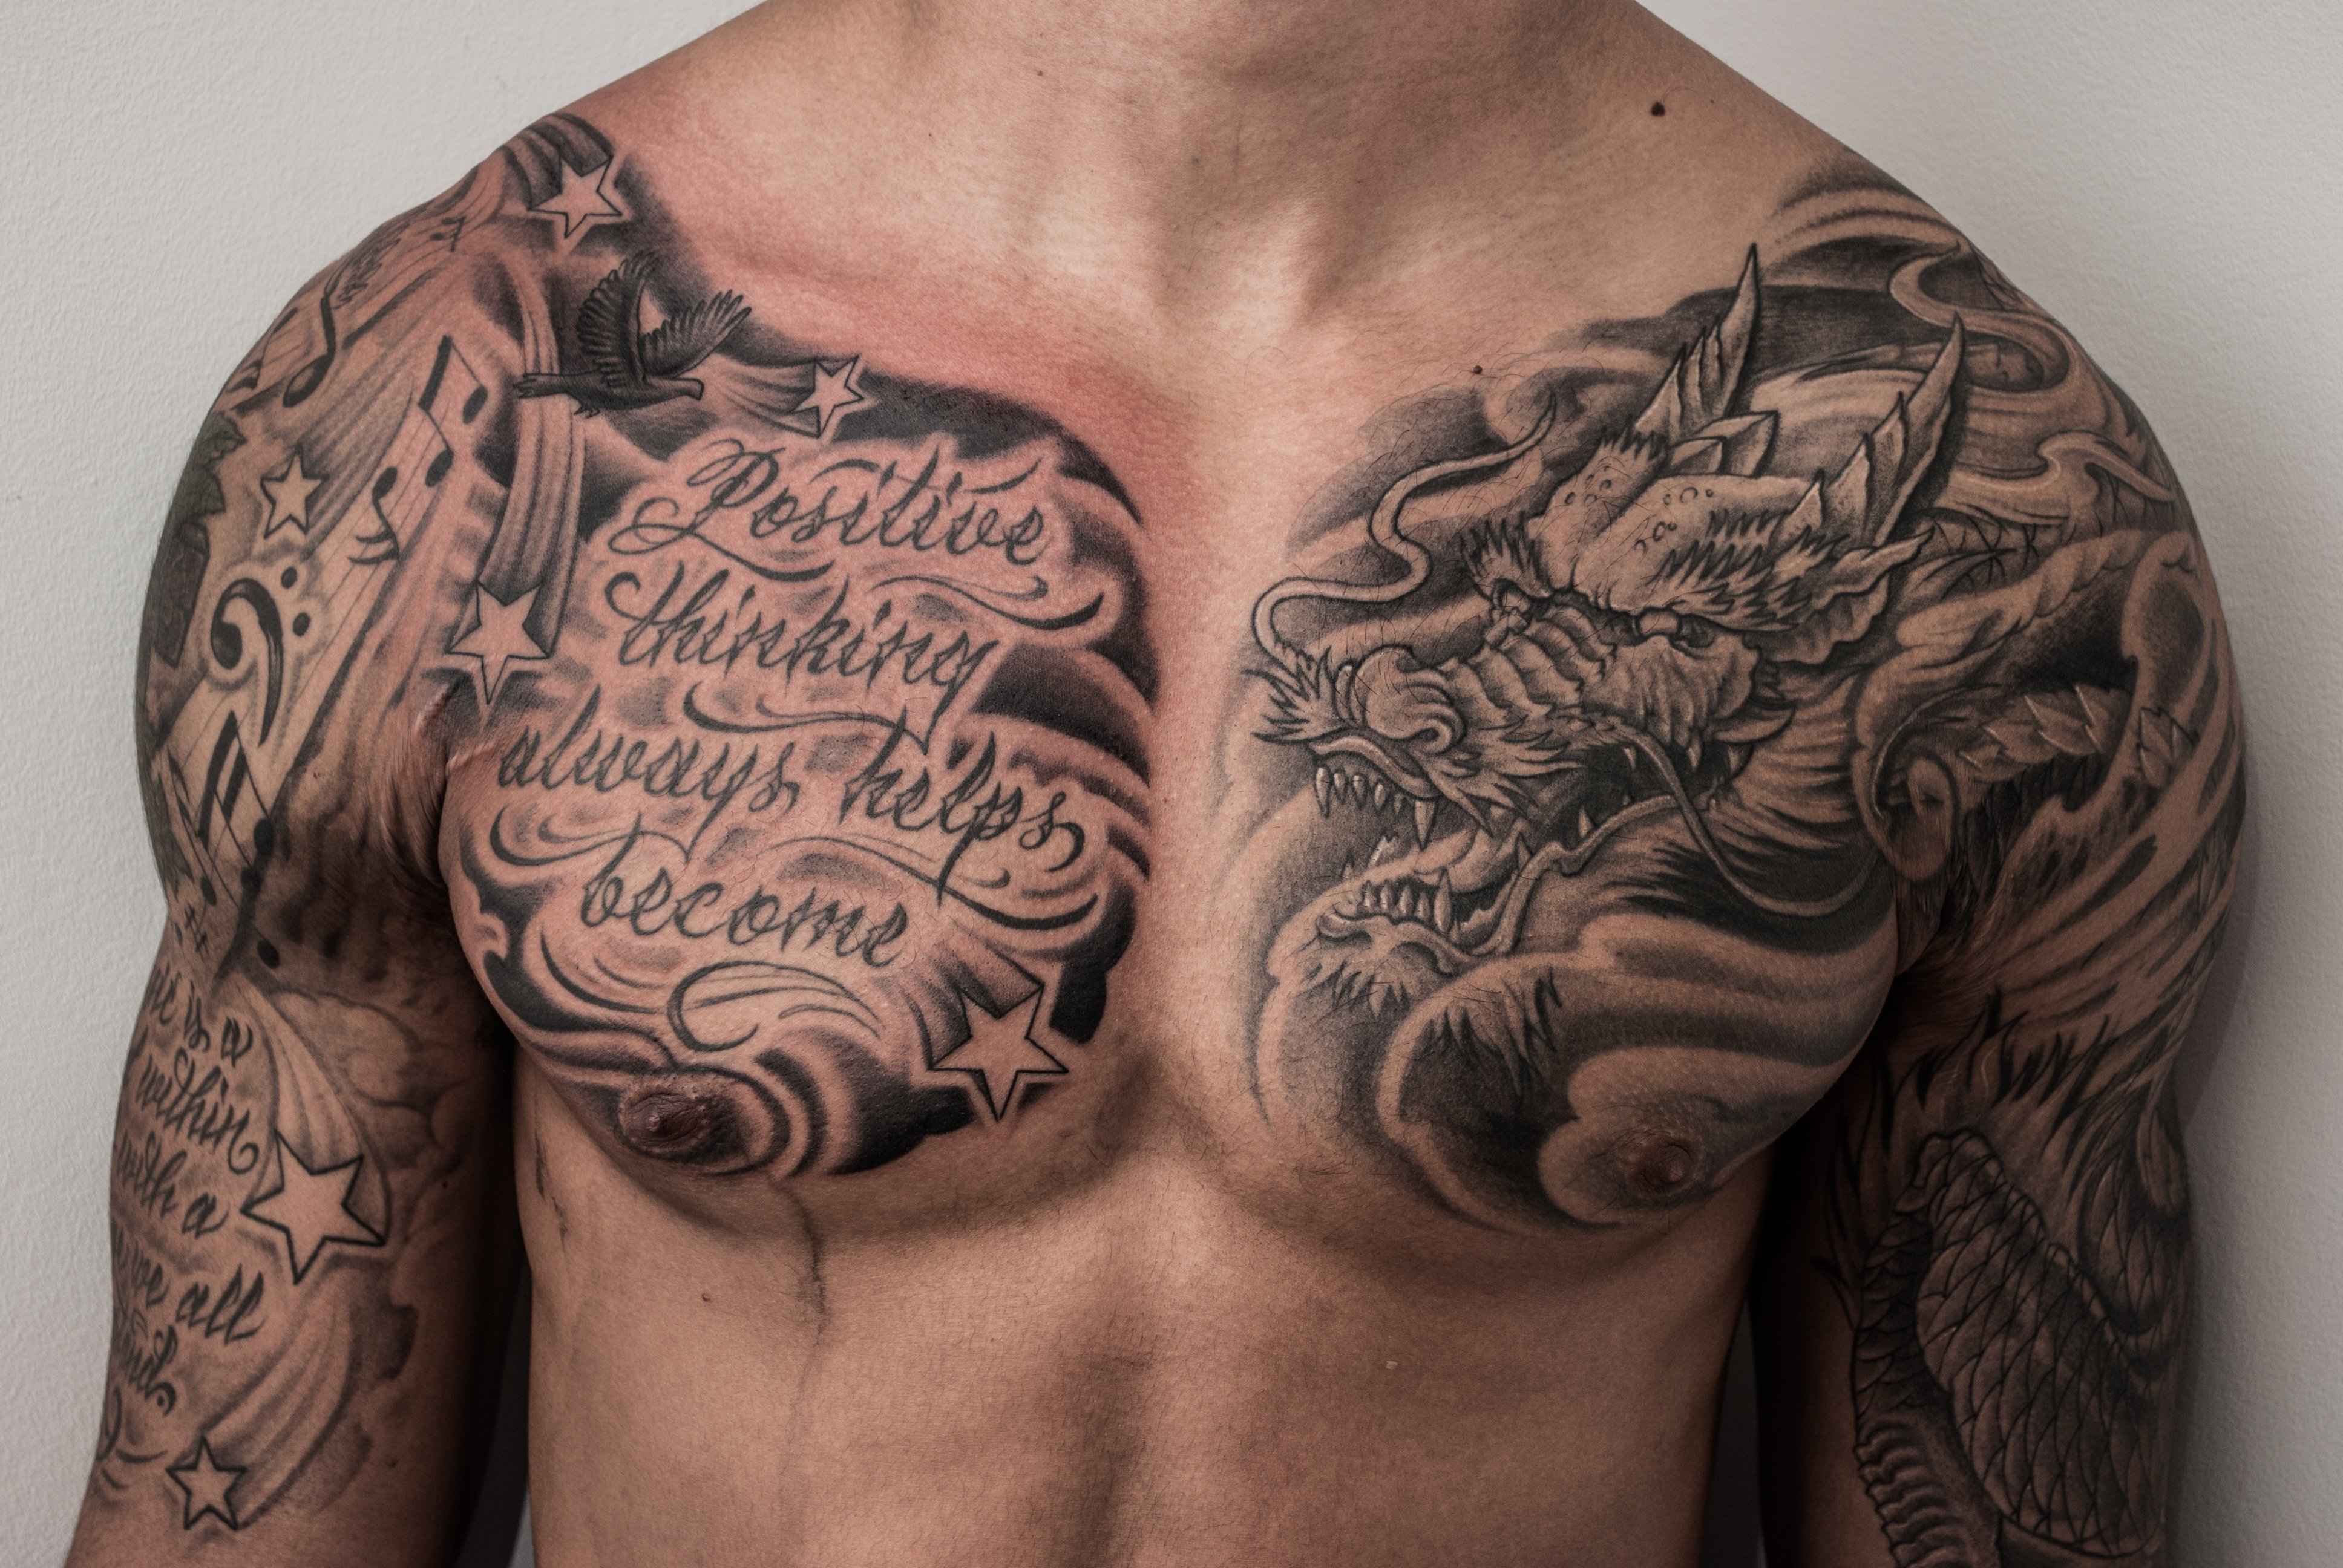 10 Nice Chest Tattoos For Men Ideas 2021